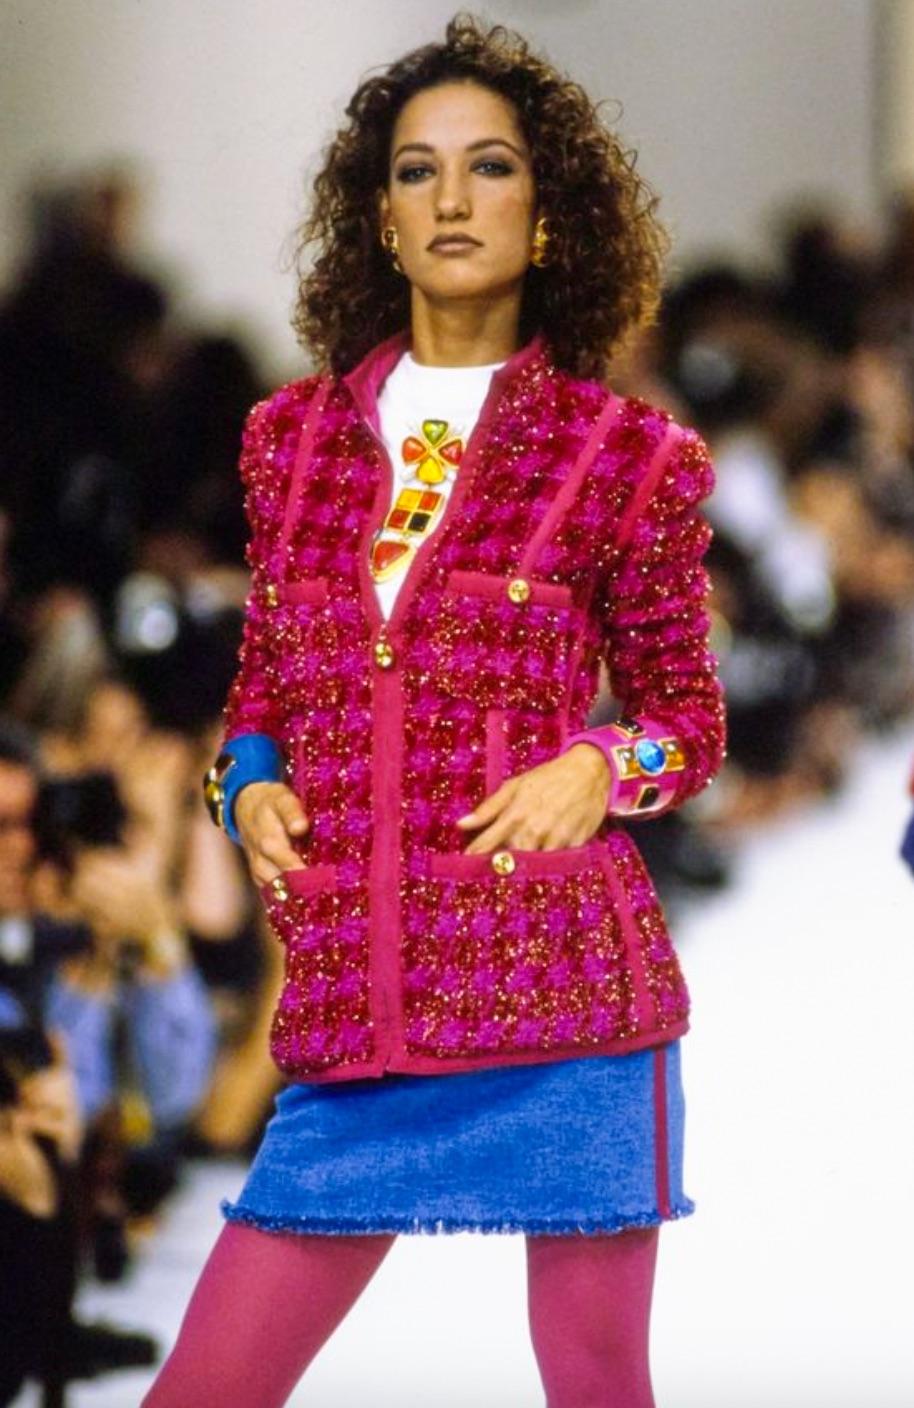 This vintage fuchsia pink jacket is a true gem from Karl Lagerfeld's iconic Fall/Winter 1991 'Hip-Hop' collection. As seen on top model Marpessa Hennick during the runway show, this collectible jacket features a shimmery pink houndstooth tweed